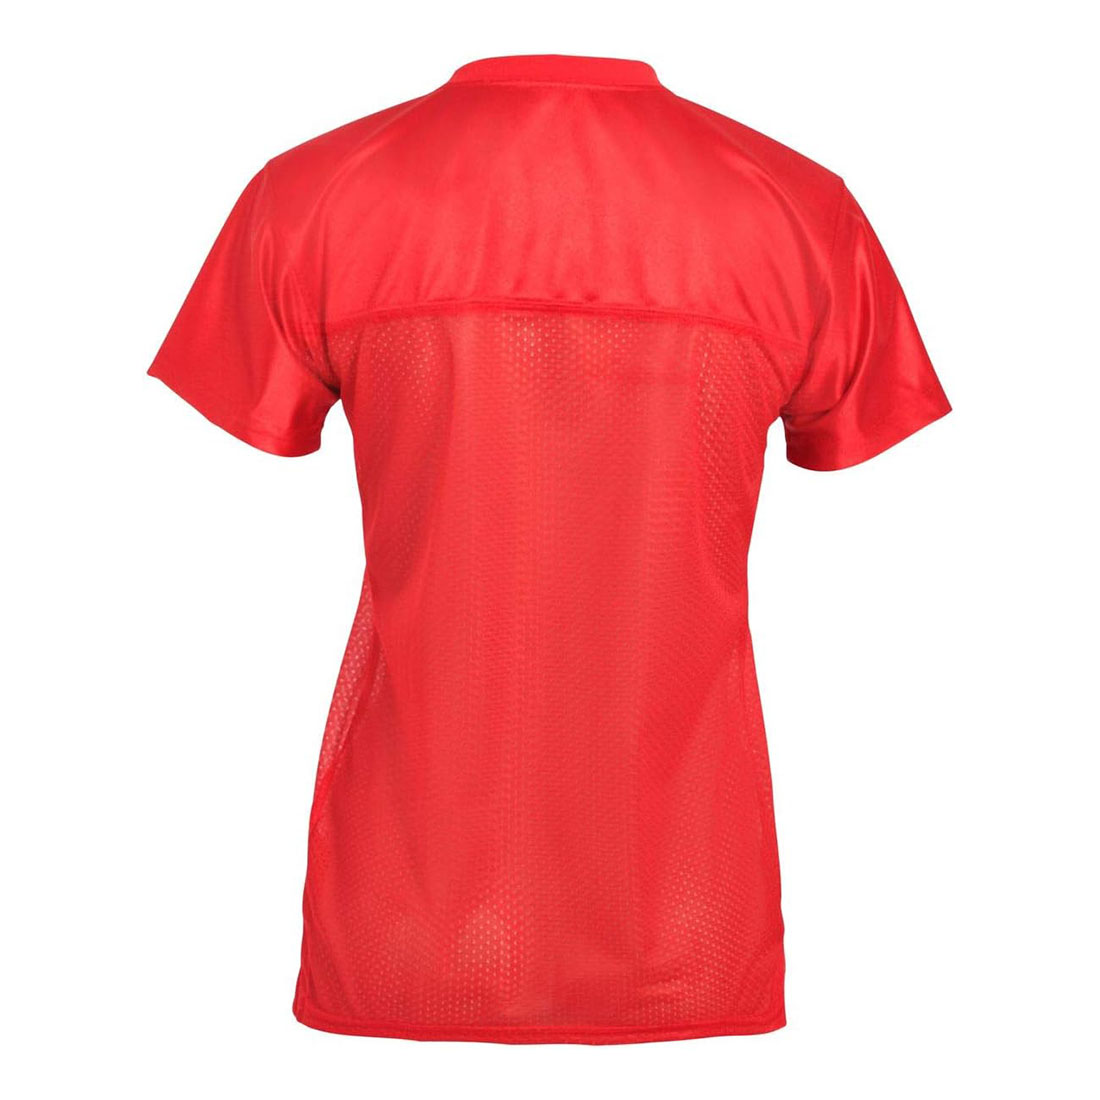 women rugby football soccer shirts back